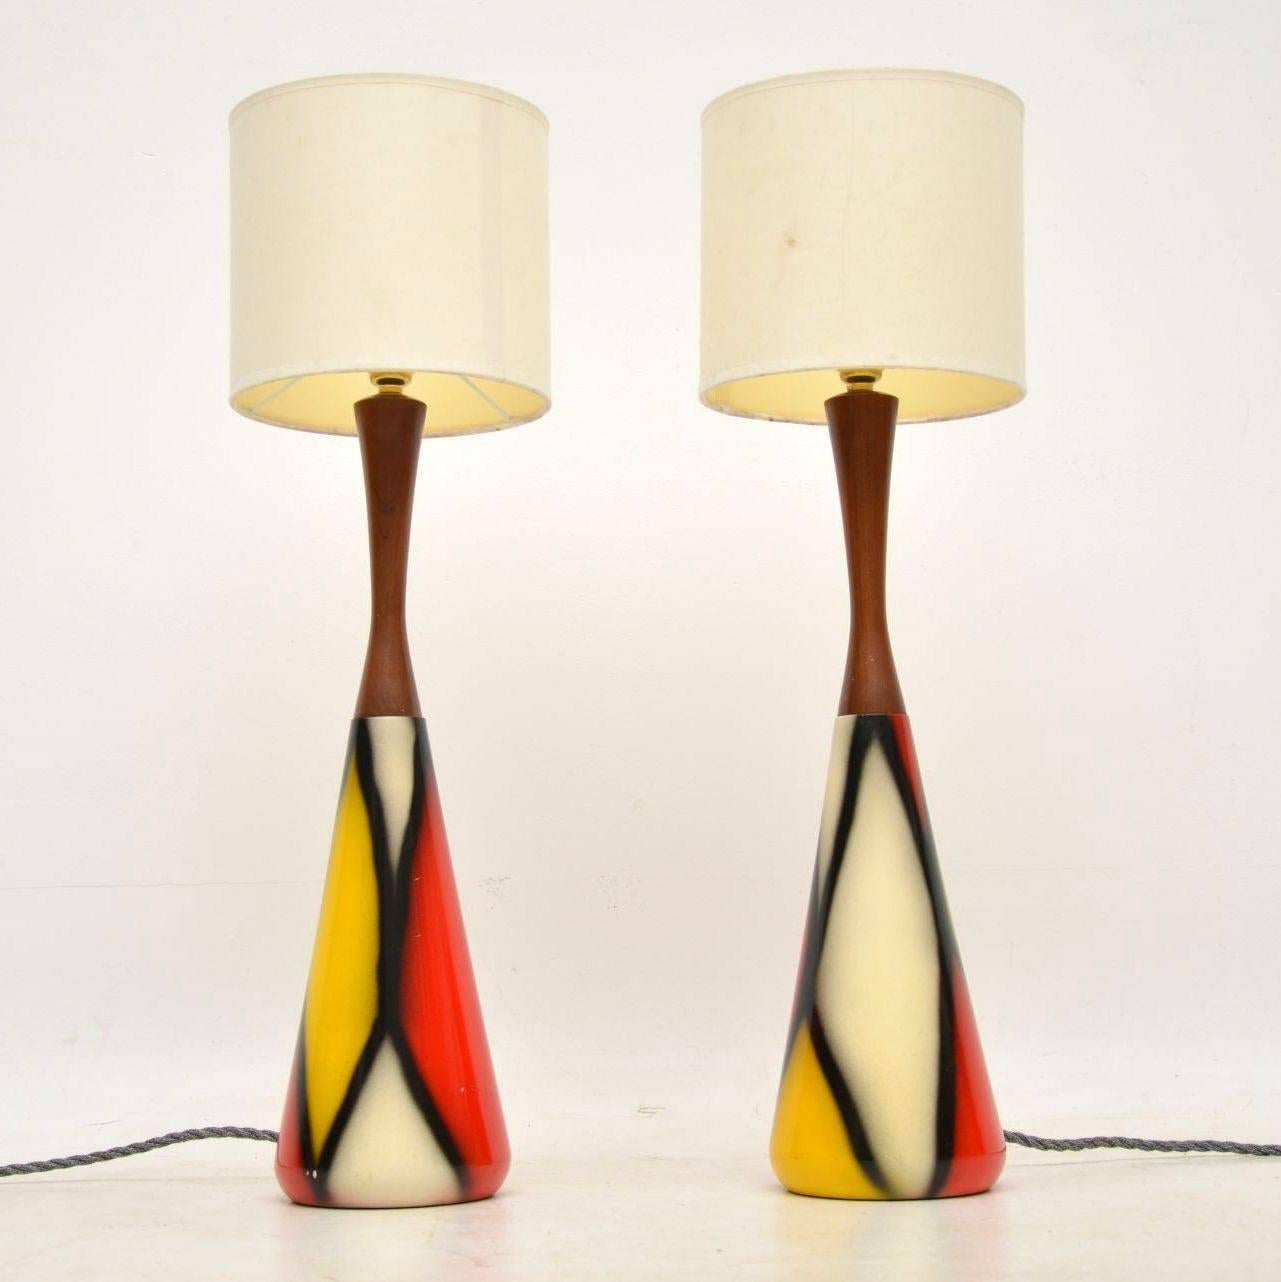 A superb pair of vintage table lamps, these date from the 1960s. They have a beautiful conical design, the colourful part is made from some sort of resin, with solid teak tops. They are in excellent condition, we have had them newly re-wired and PAT